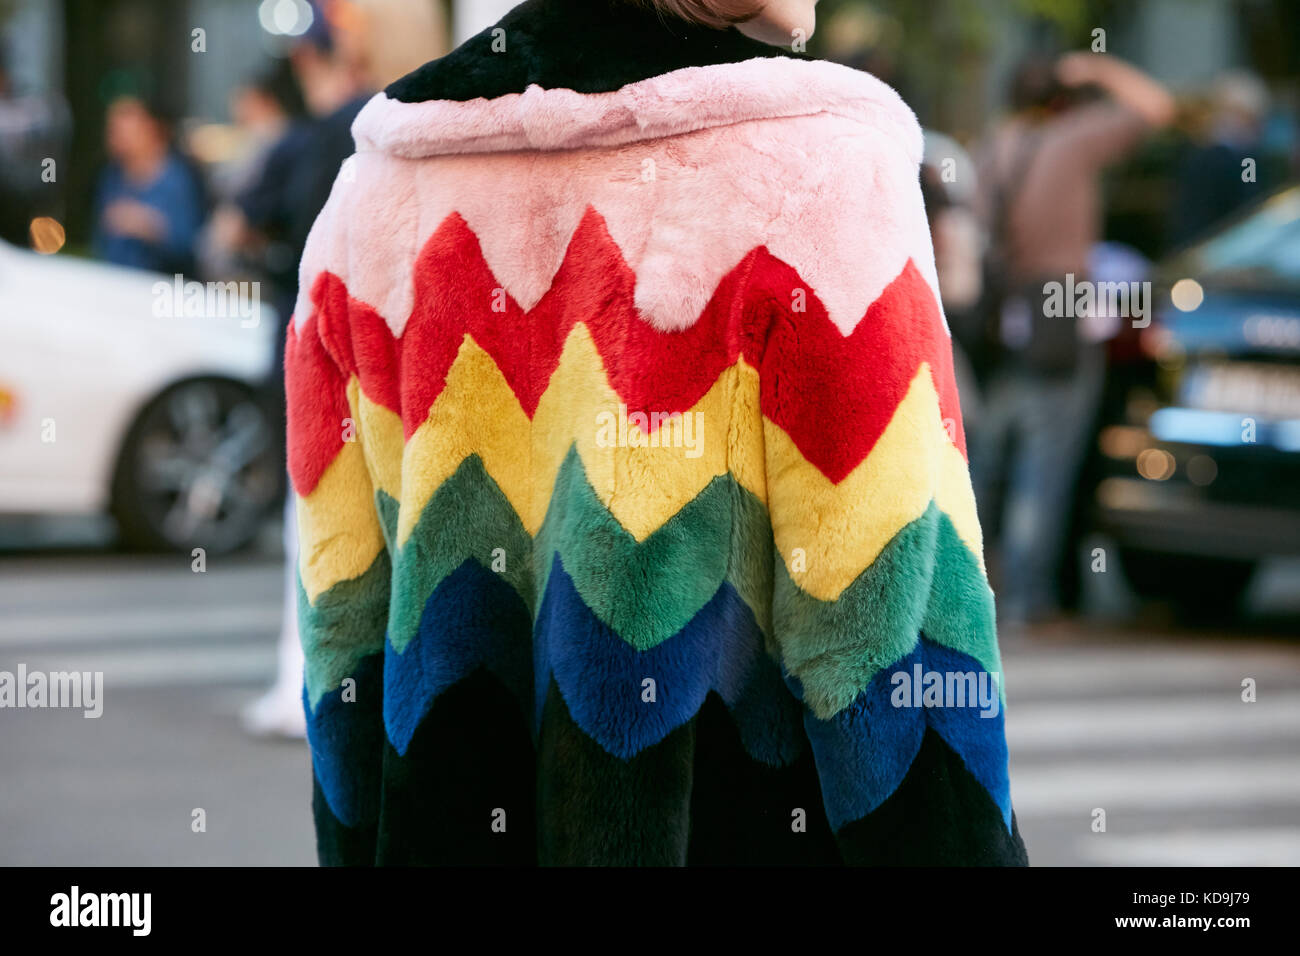 MILAN - SEPTEMBER 21: Woman with fur coat with geometric design in pink,  red, yellow, green, blue and black colors before Prada fashion show, Milan  Fa Stock Photo - Alamy